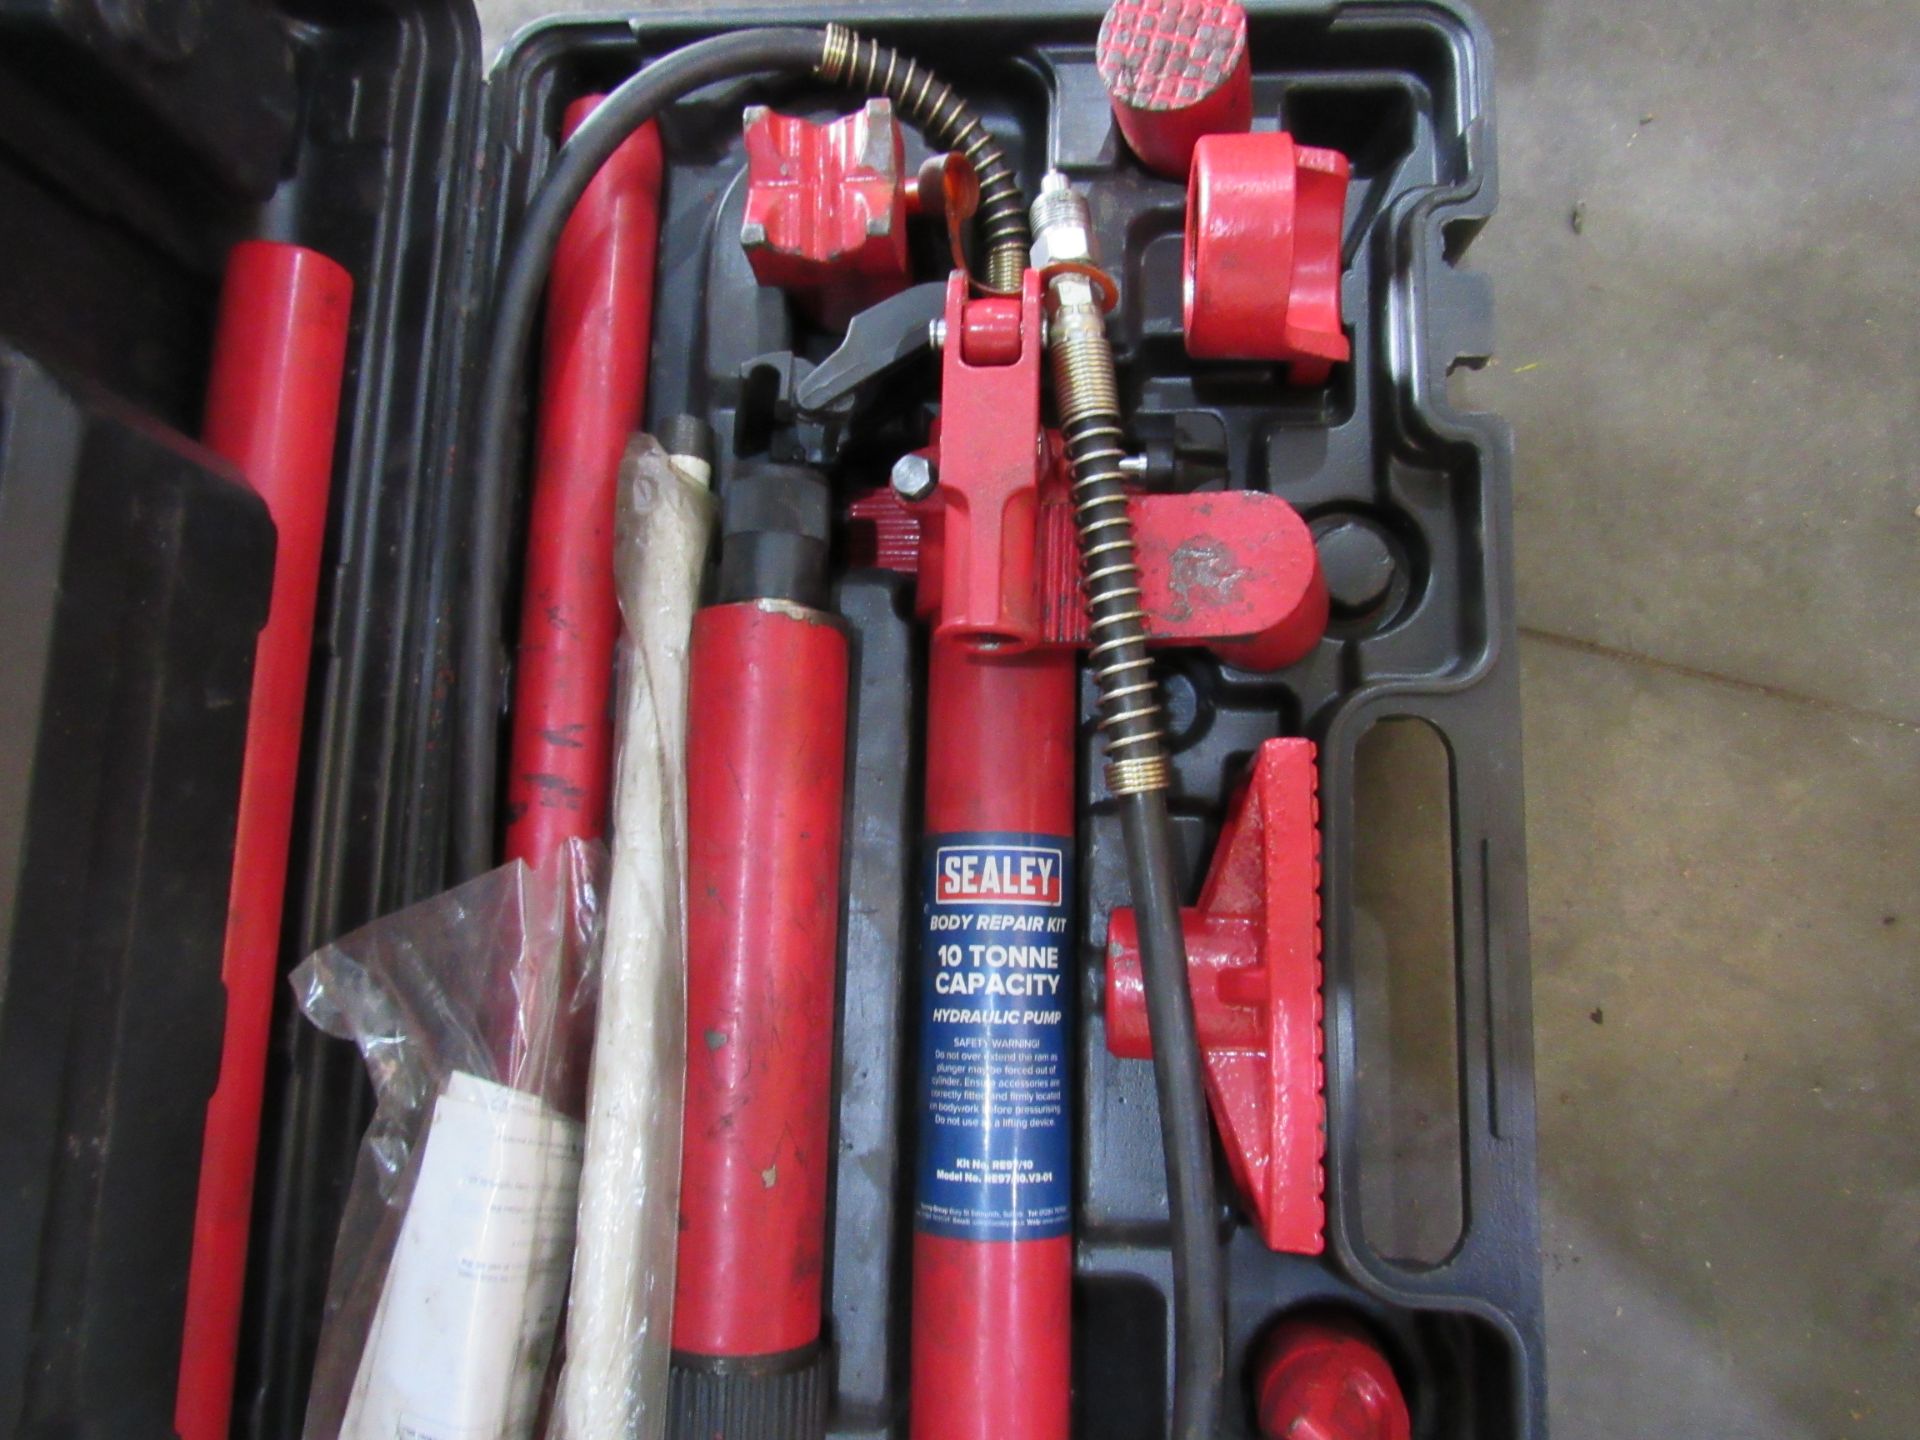 Sealey Body Repair Kit, with 10 Tonne Capacity Hydraulic Pump - Image 2 of 3